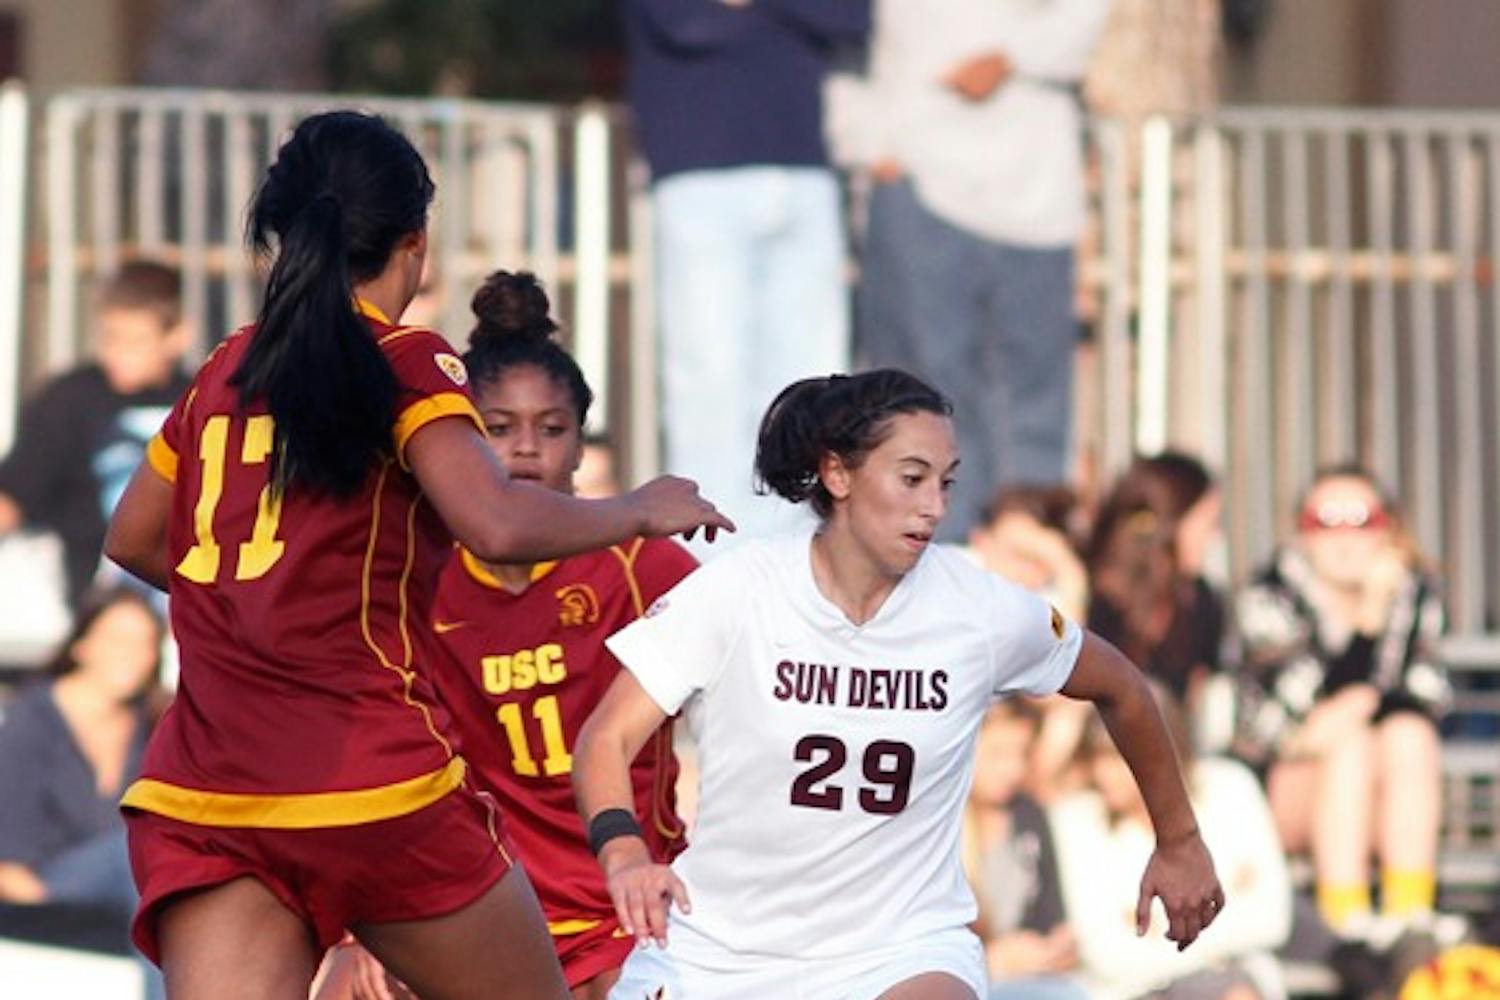 TIED UP: Senior midfielder Alexandra Elston tries to dribble past Cal junior defender Danielle Brunache during Sunday's game. The game ended in a 1-1 draw, and ASU finished the weekend without a win, having also lost to No, 1 Stanford on Friday. (Photo by Aaron Lavinsky)